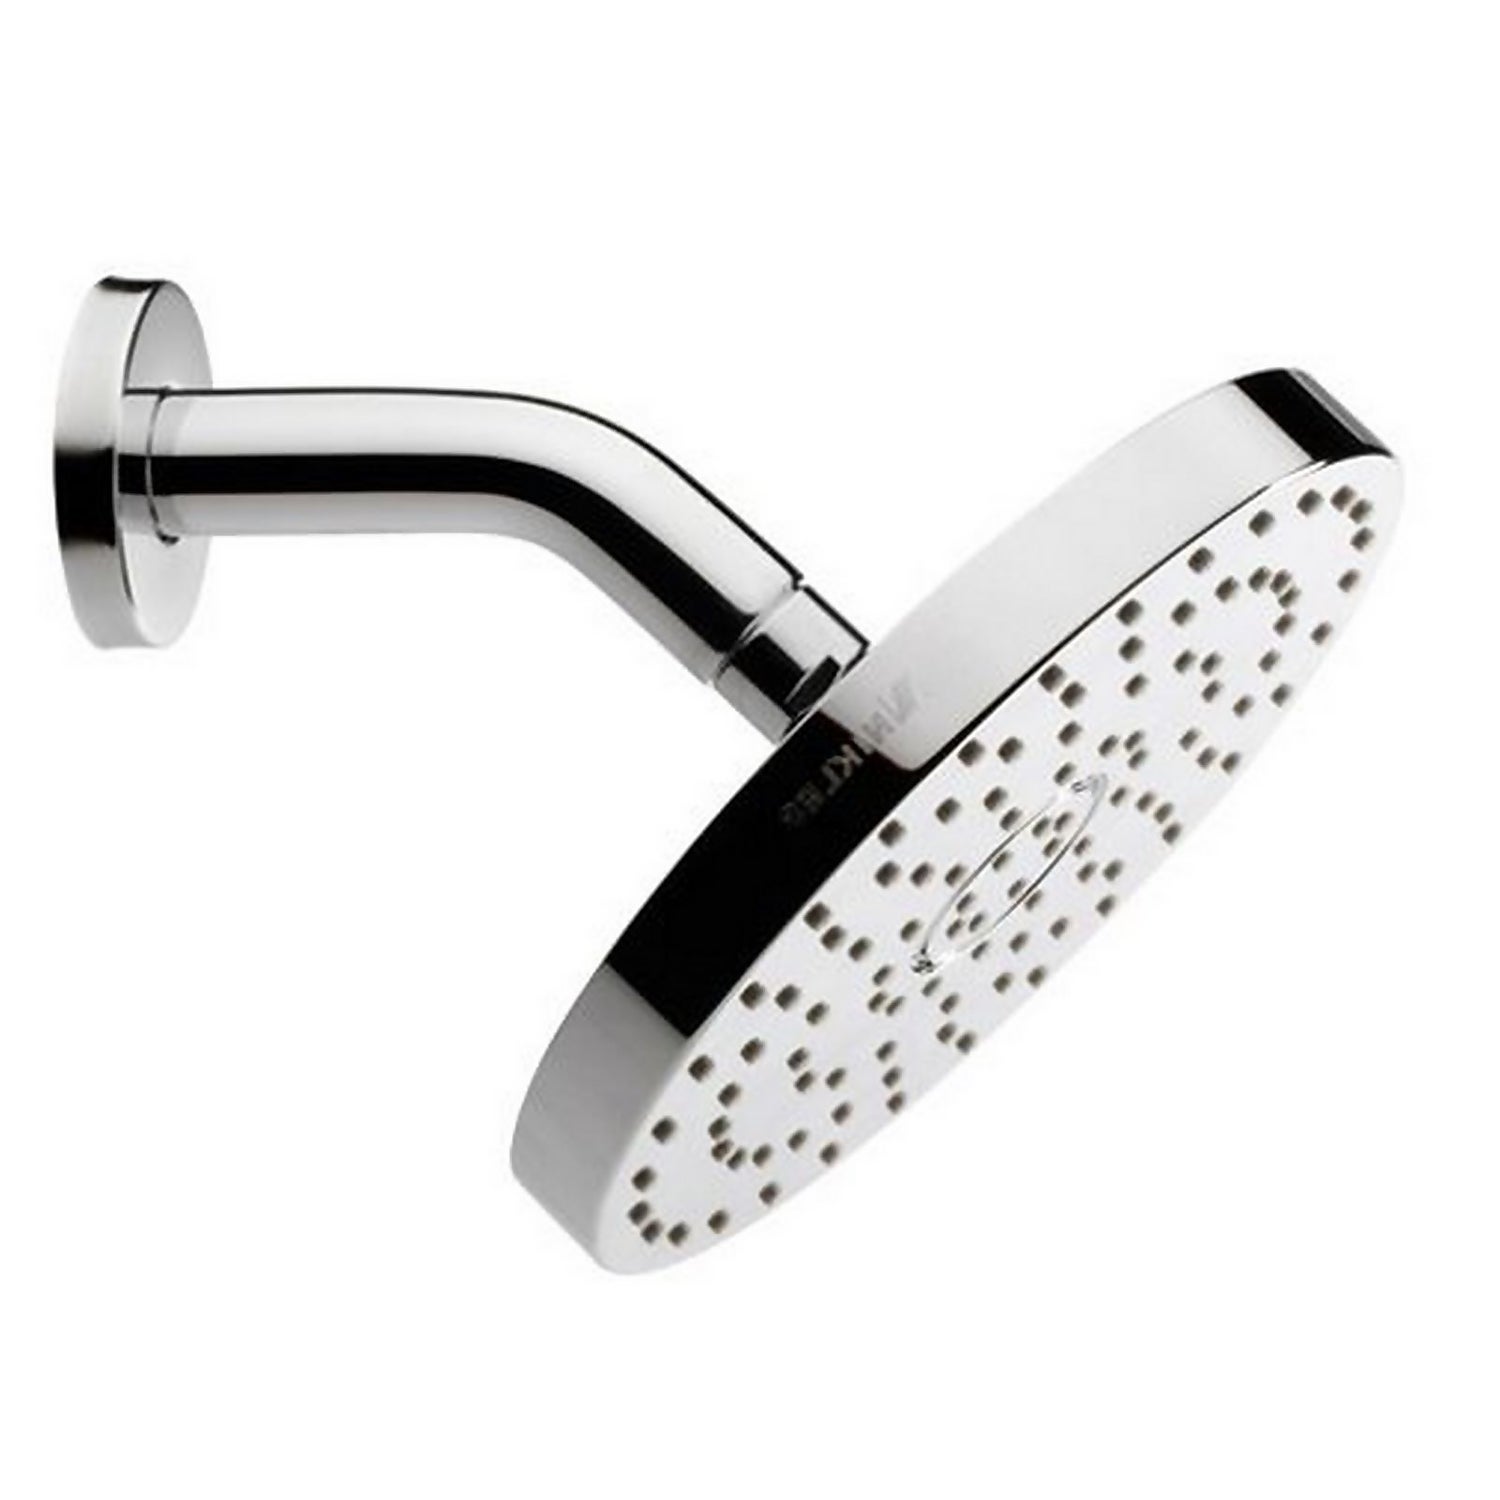 Airdrop 180mm Shower Head with angled Wall Arm - Chrome